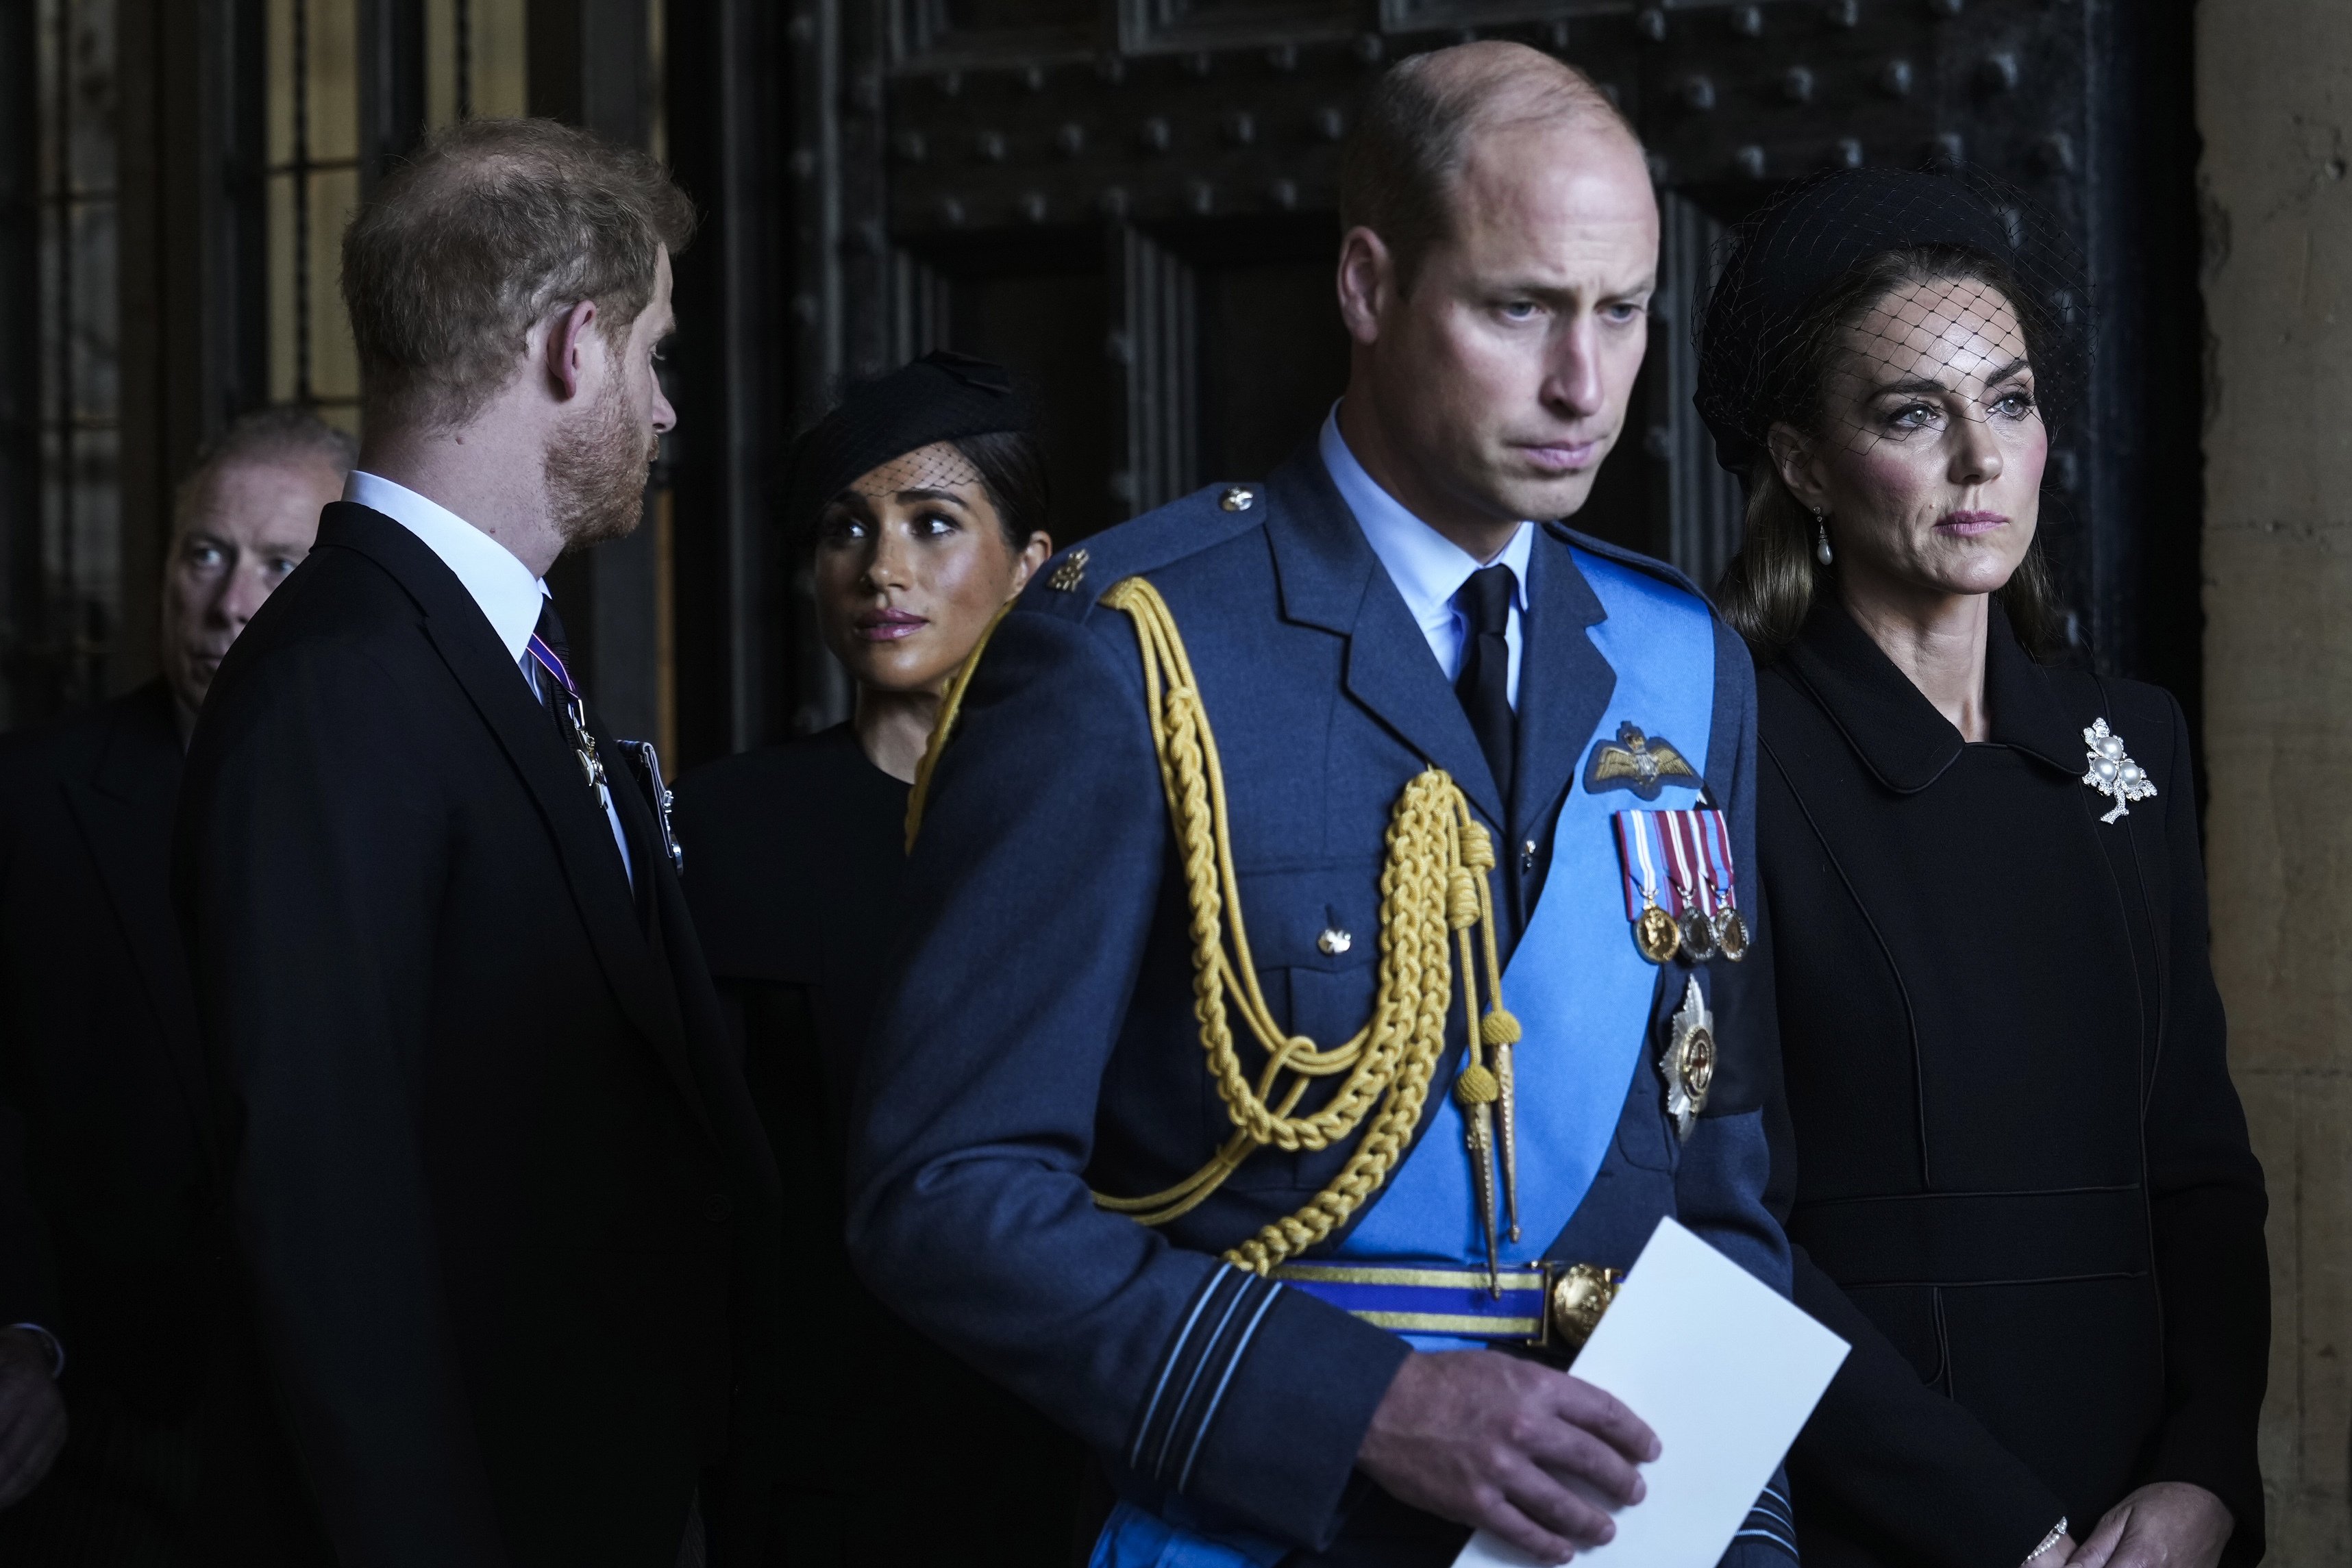 Prince William, Prince of Wales with Catherine, Princess of Wales and Prince Harry with Meghan, Duchess of Sussex leave after escorting the coffin of Queen Elizabeth II to Westminster Hall from Buckingham Palace for her lying in state, on September 14, 2022 in London, United Kingdom | Source: Getty Images 